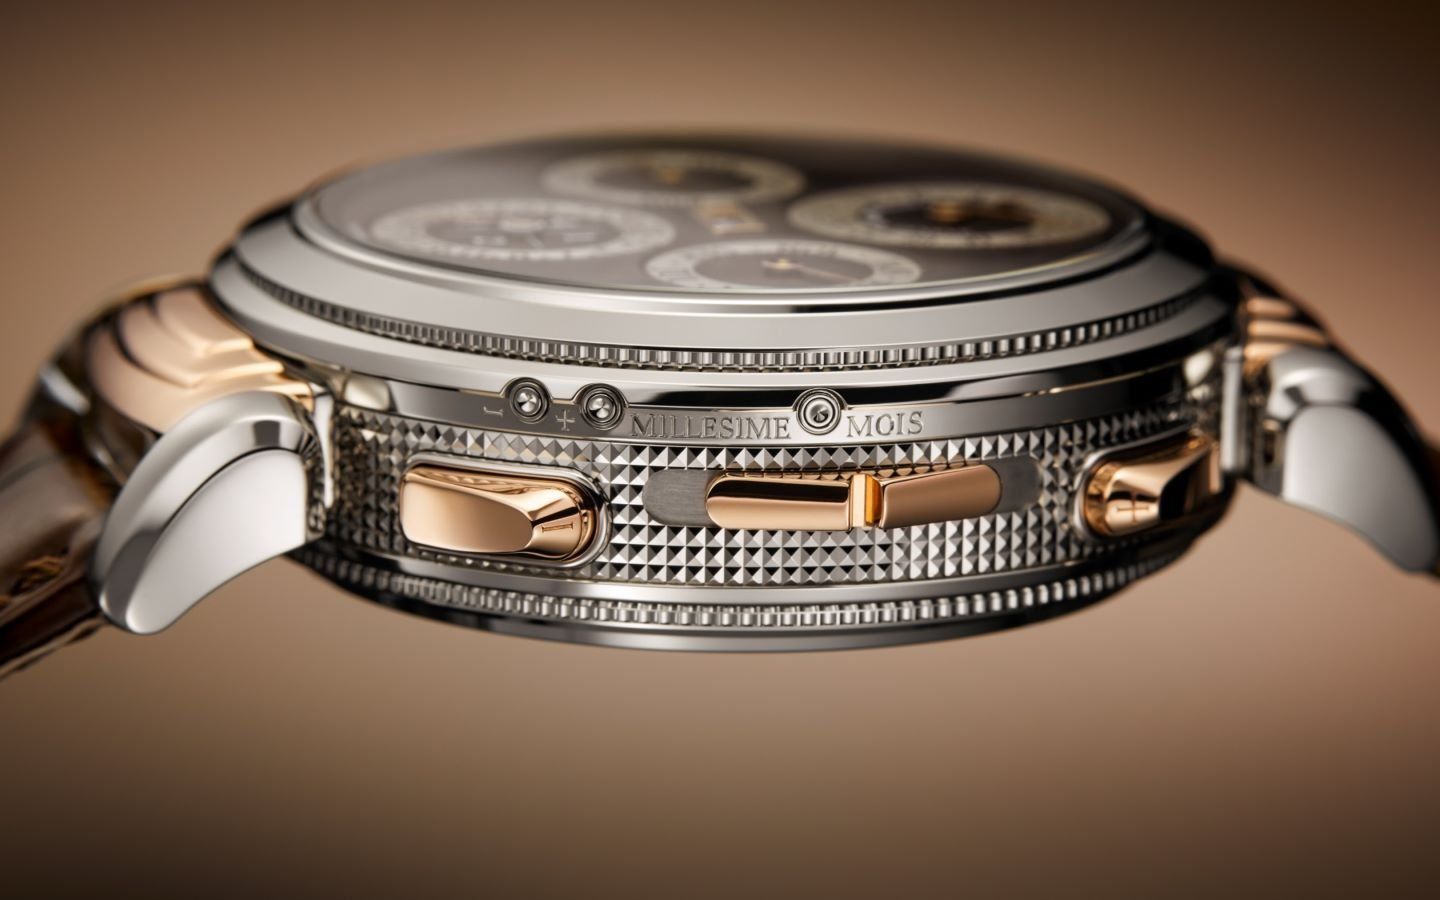 Patek Philippe Grandmaster Chime In White Gold & Rose Gold Iterations